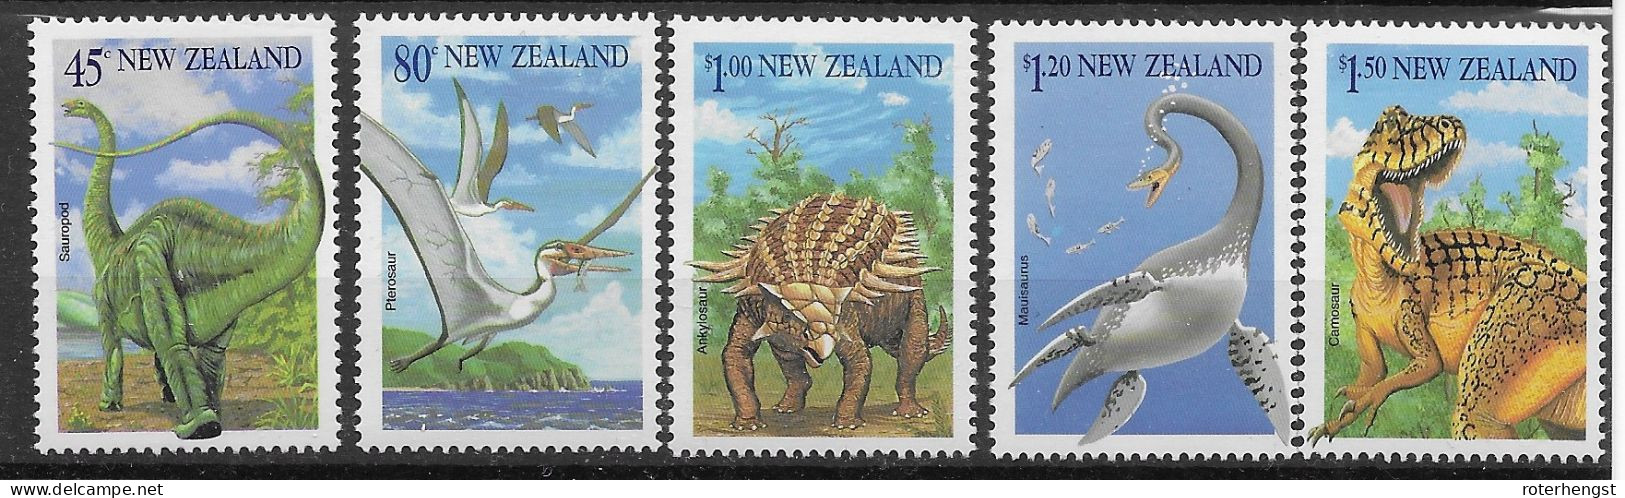 New Zealand Mnh ** 1993 Dinosaurs Set Without Booklet Stamp - Nuevos